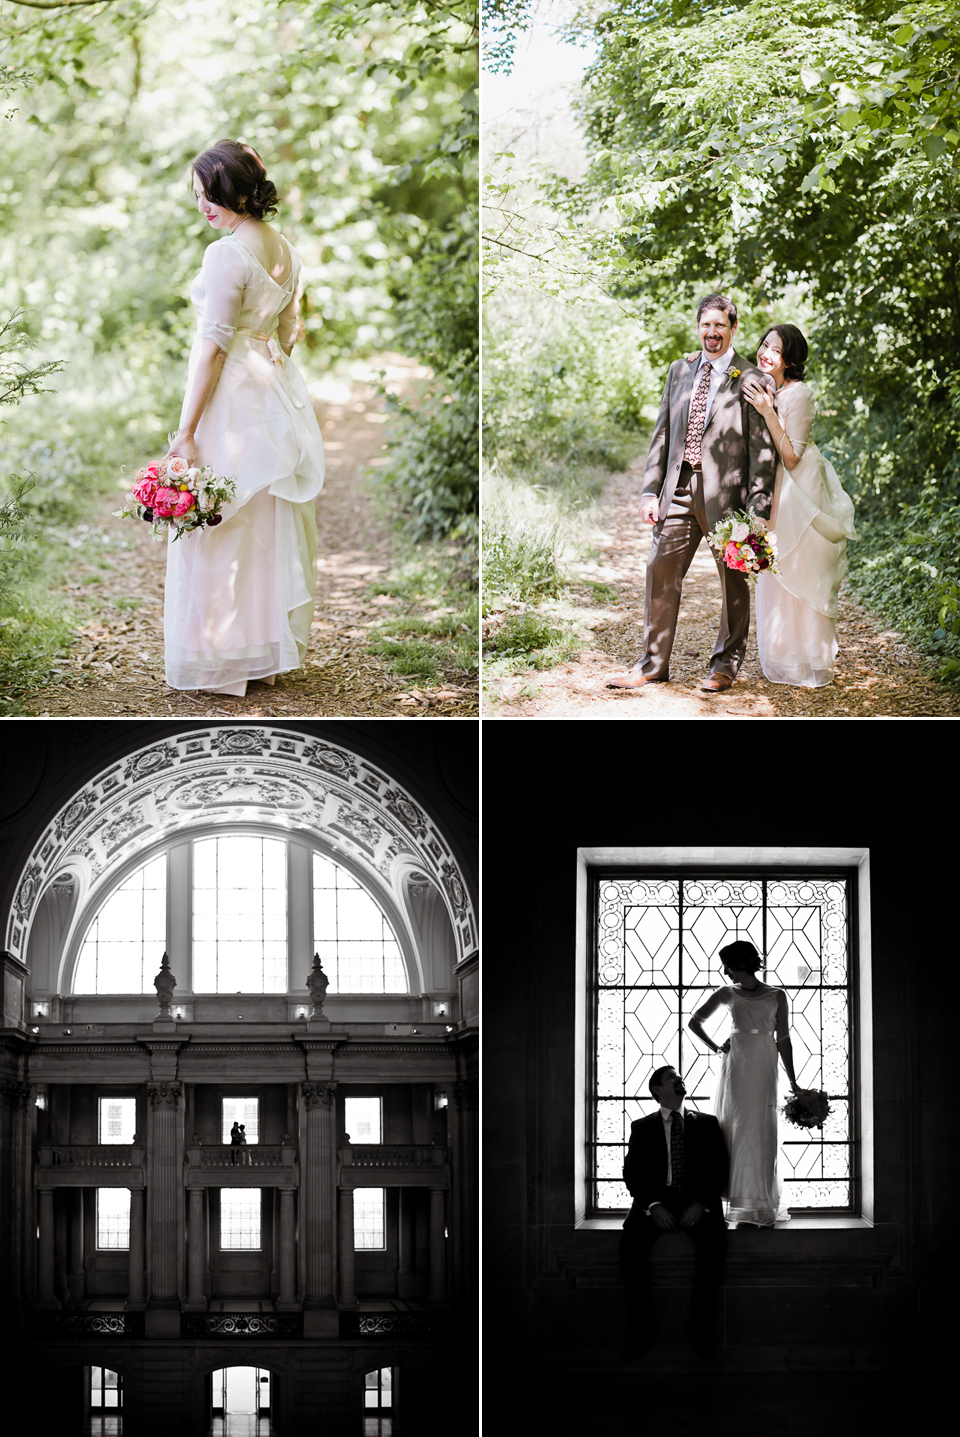 vintage wedding, san francisco civil ceremony, bride and groom photos in golden gate park, creative city hall photos, silhouettes, untraditional bouquet, coral peonies bouquet, laura miller design florals, dappled lighting